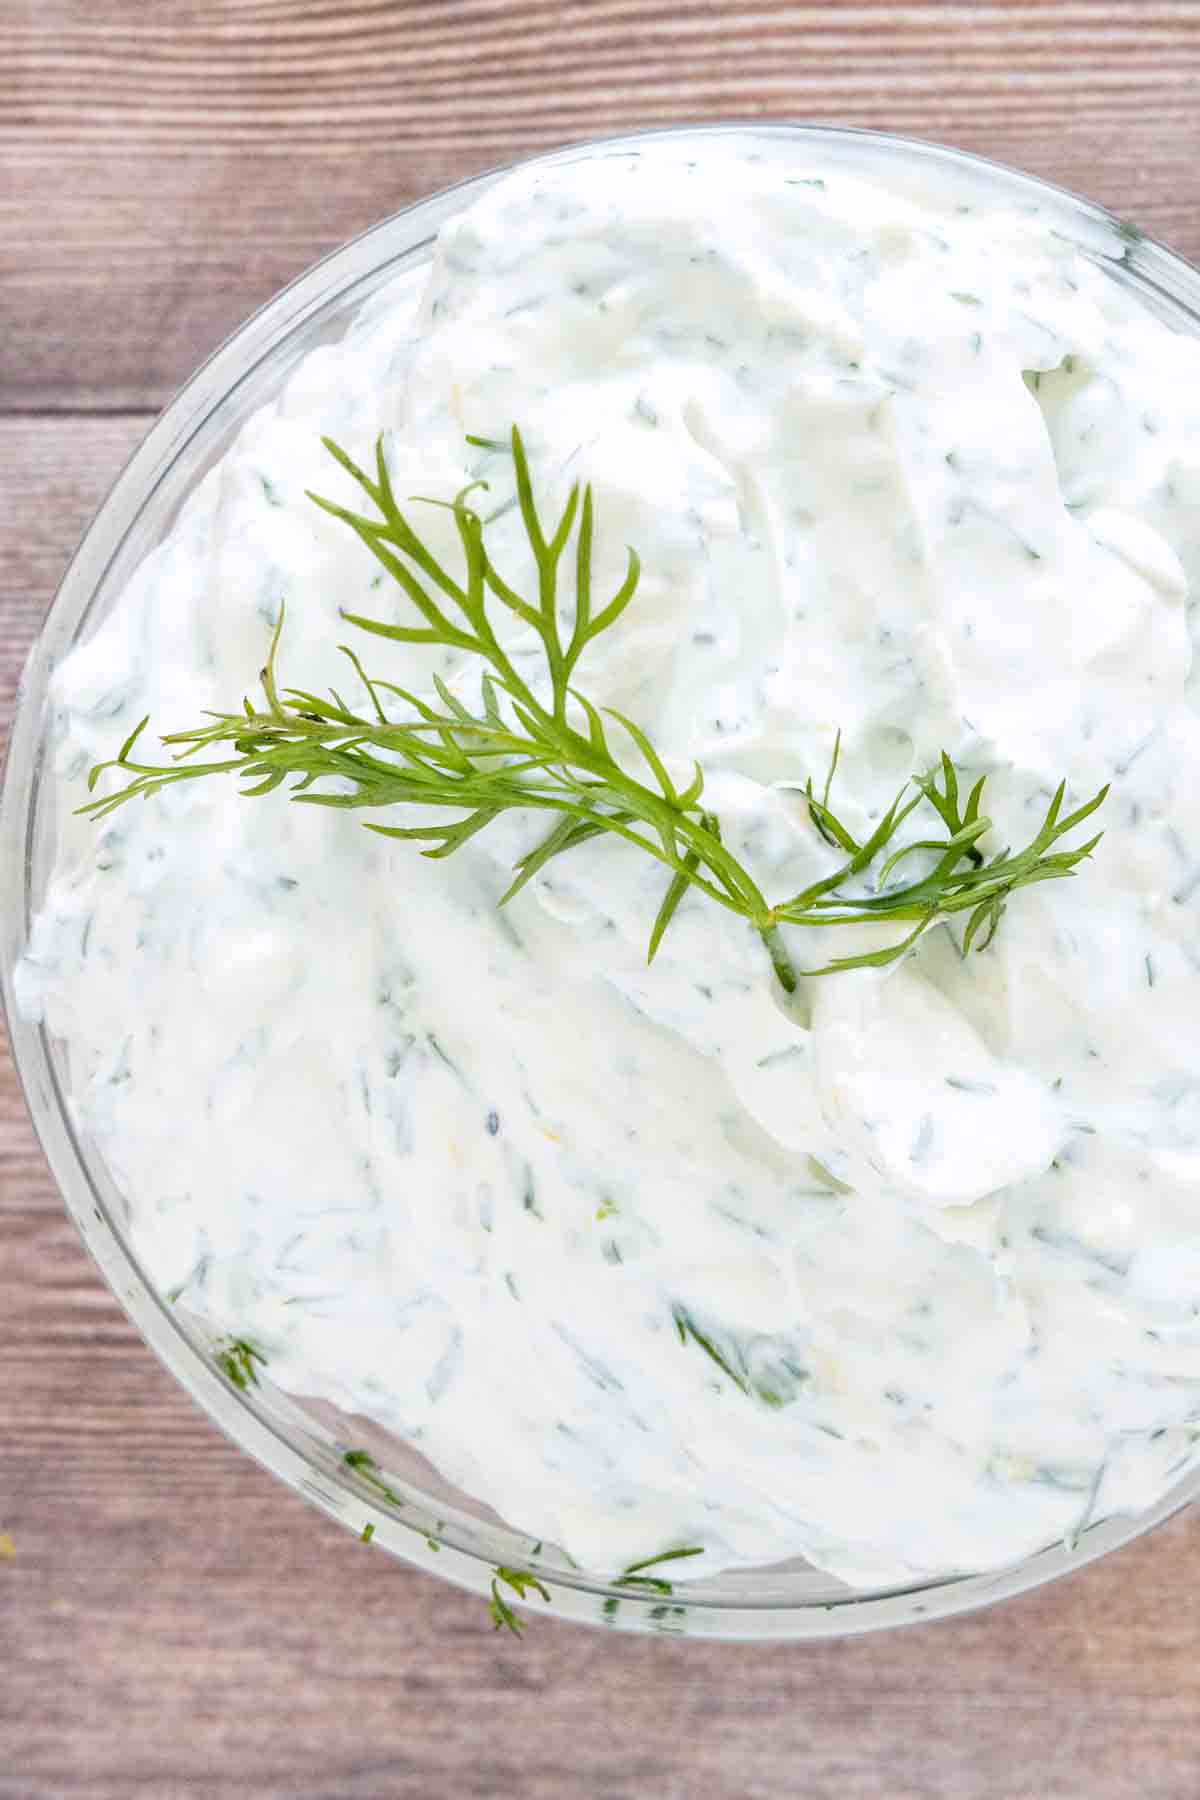 Dill yogurt sauce with a sprig of dill  on top in a glass bowl.